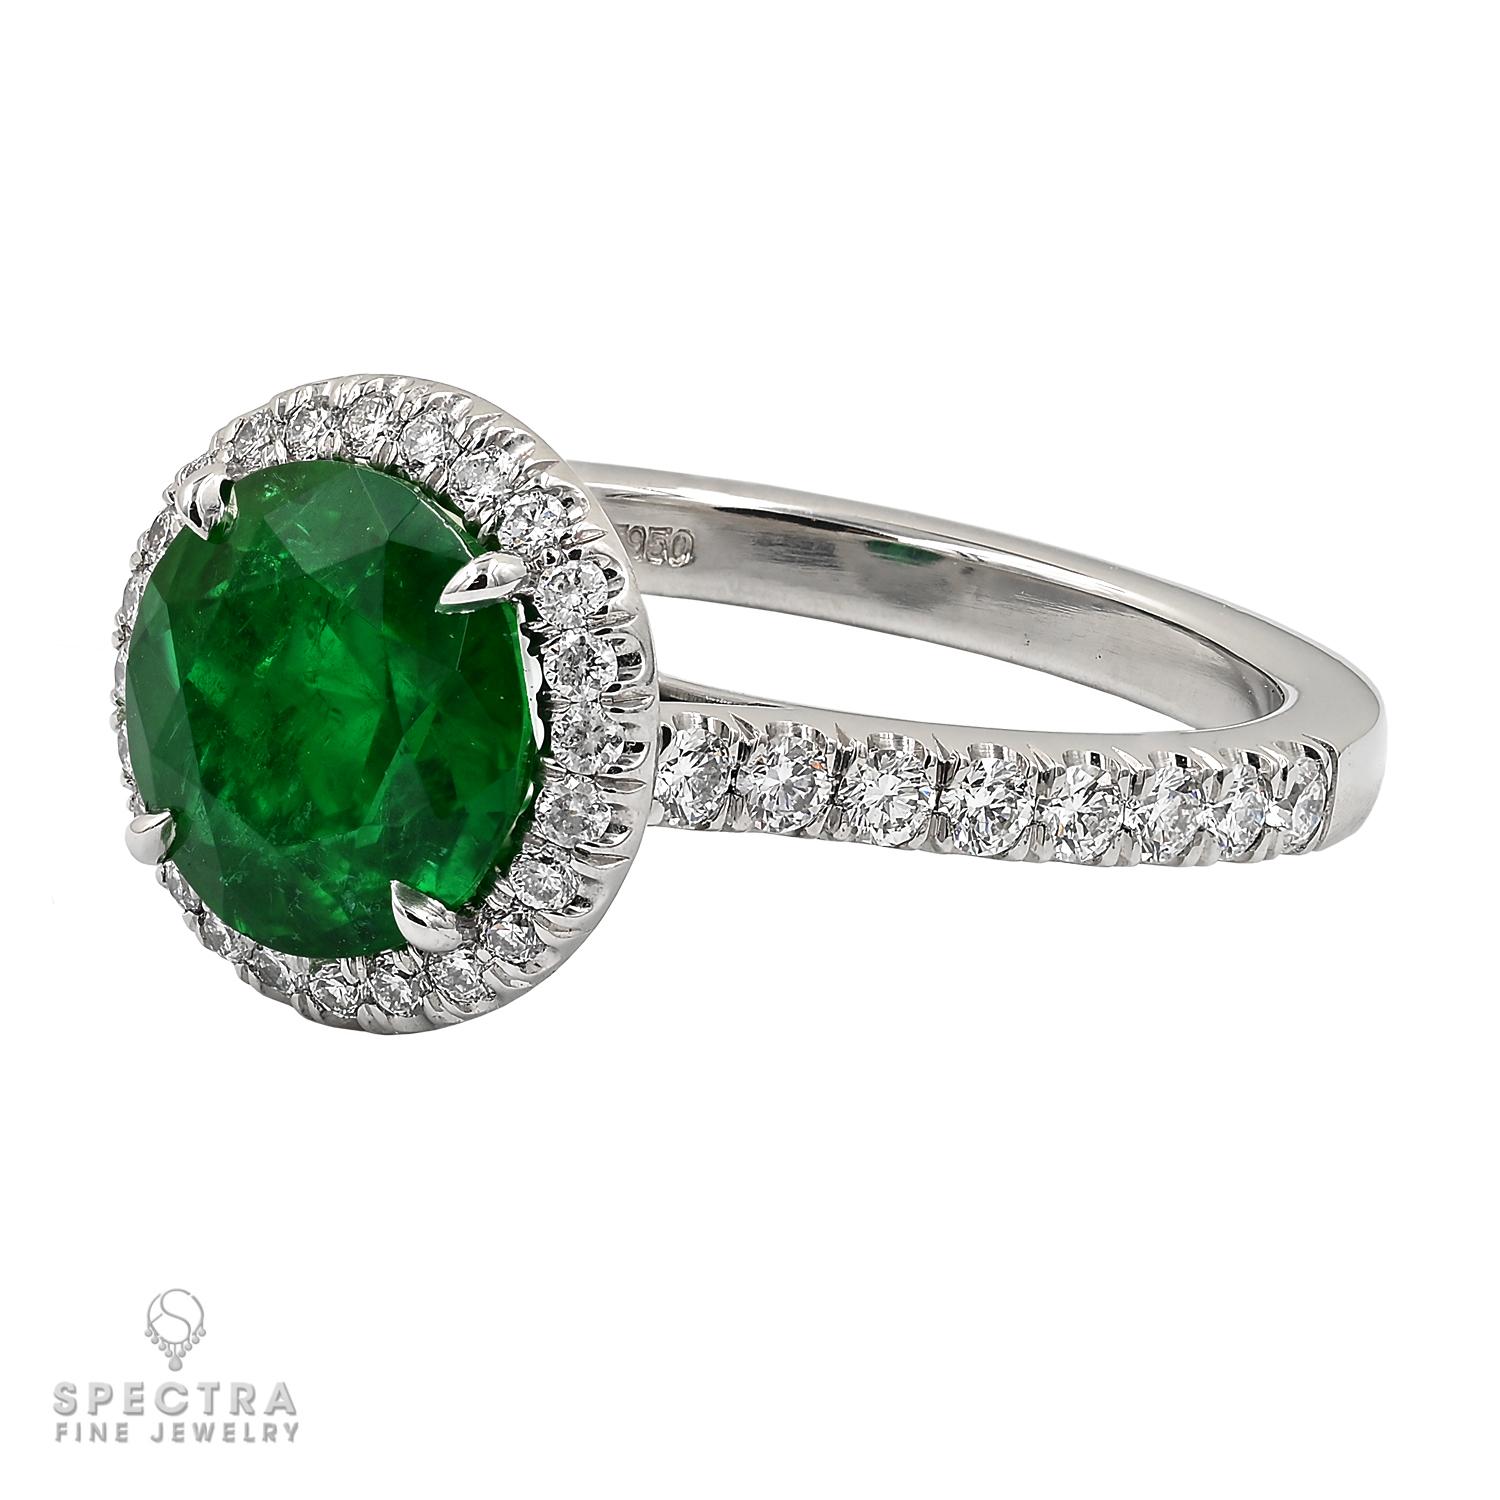 This 1.95-carat Round Emerald Diamond Ring is a true embodiment of timeless beauty.
At its center gleams a mesmerizing 1.95-carat round emerald, certified by GRS stating that it's of Himalayan origin with insignificant clarity